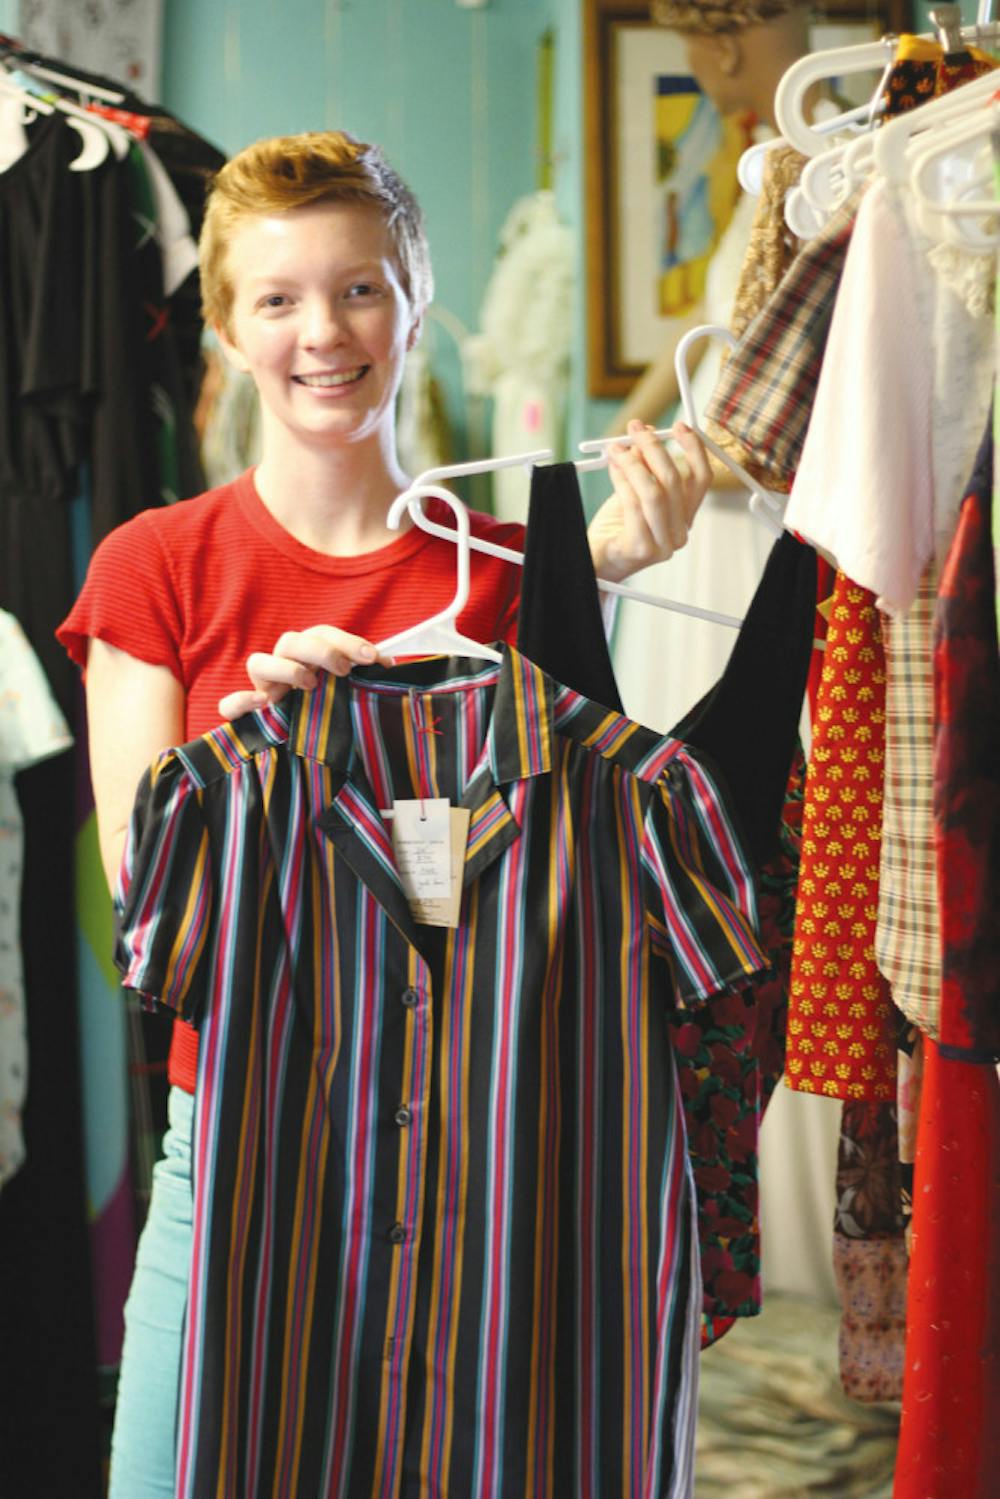 <p>Cori Kate sells her upcycled clothing line, GOSH DARN, at The Eclectic Co. Vintage &amp; Resale Shop.</p>